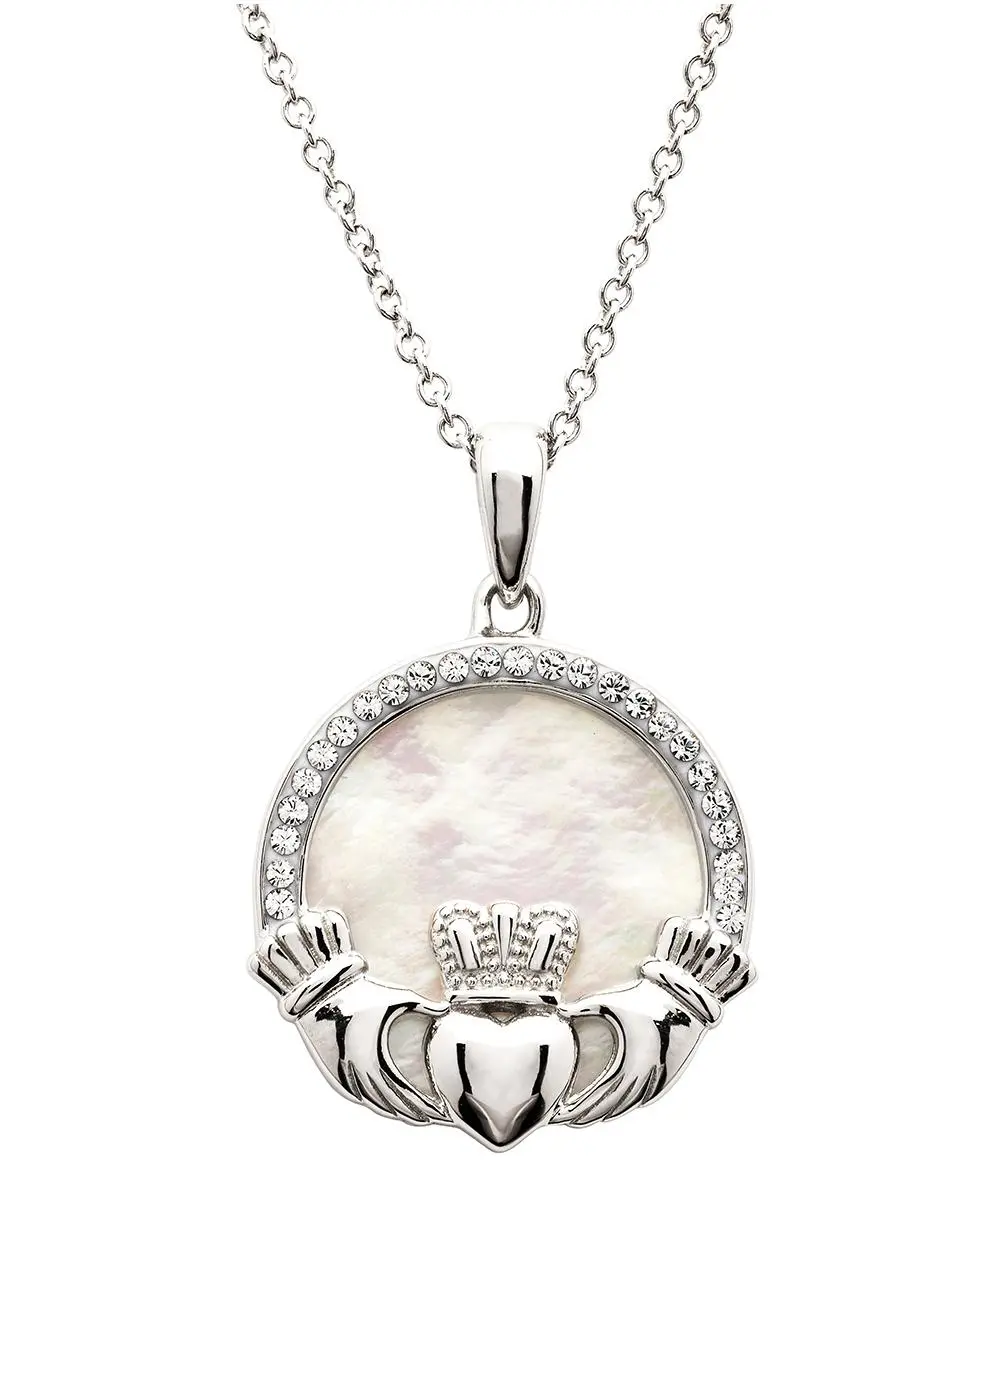 Silver Claddagh Coin Style Necklace Irish Celtic | Fenris | Claddagh  necklace, Celtic claddagh, Necklace